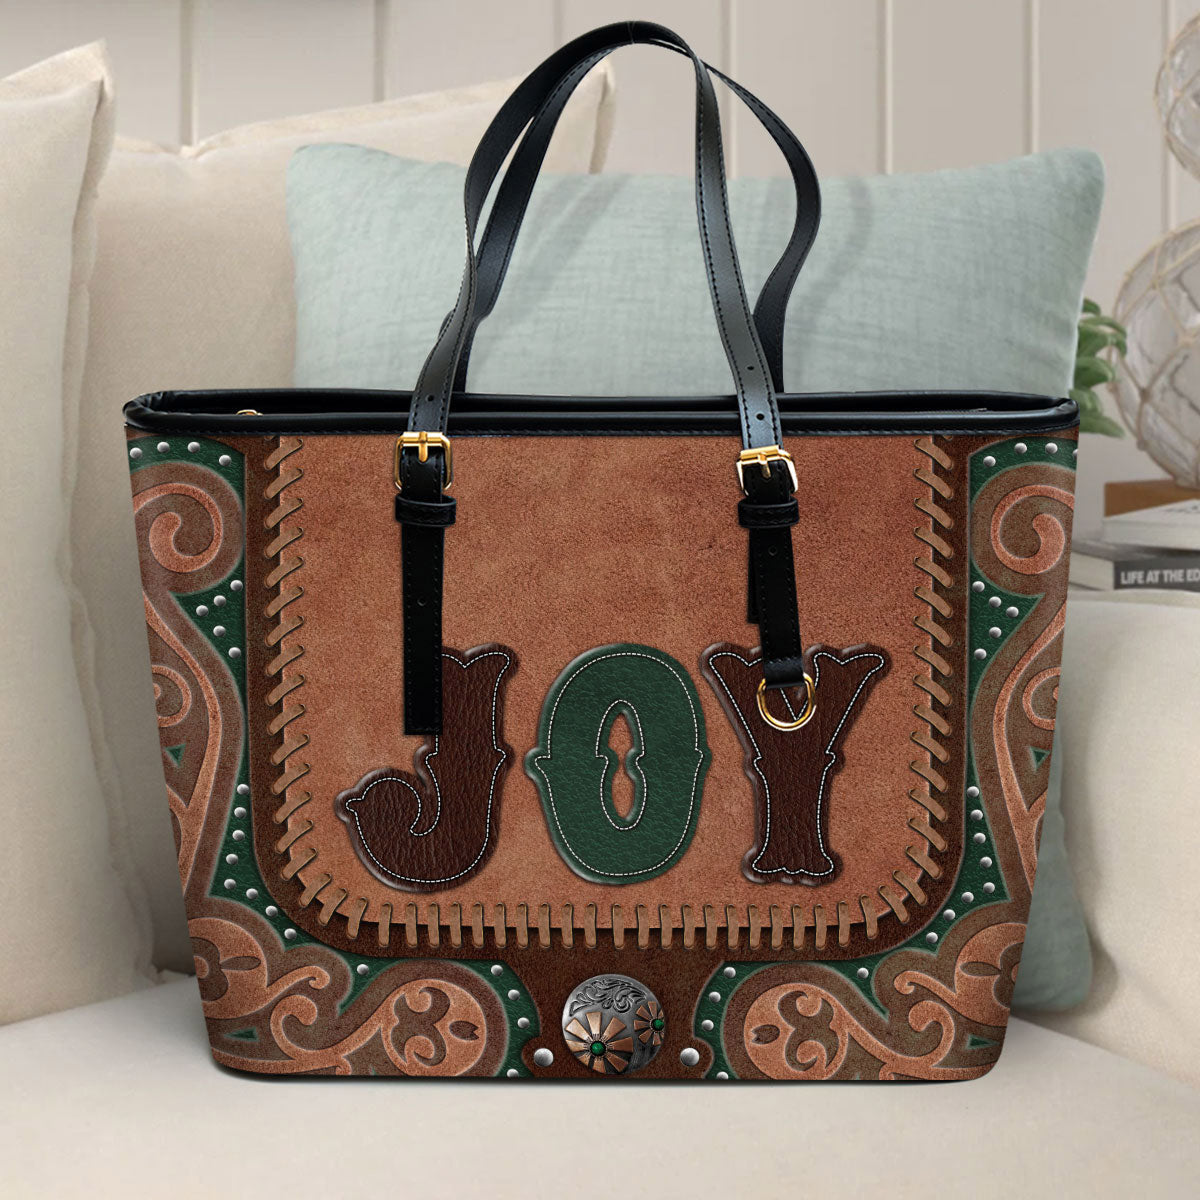 Joy Large Leather Tote Bag - Christ Gifts For Religious Women - Best Mother's Day Gifts